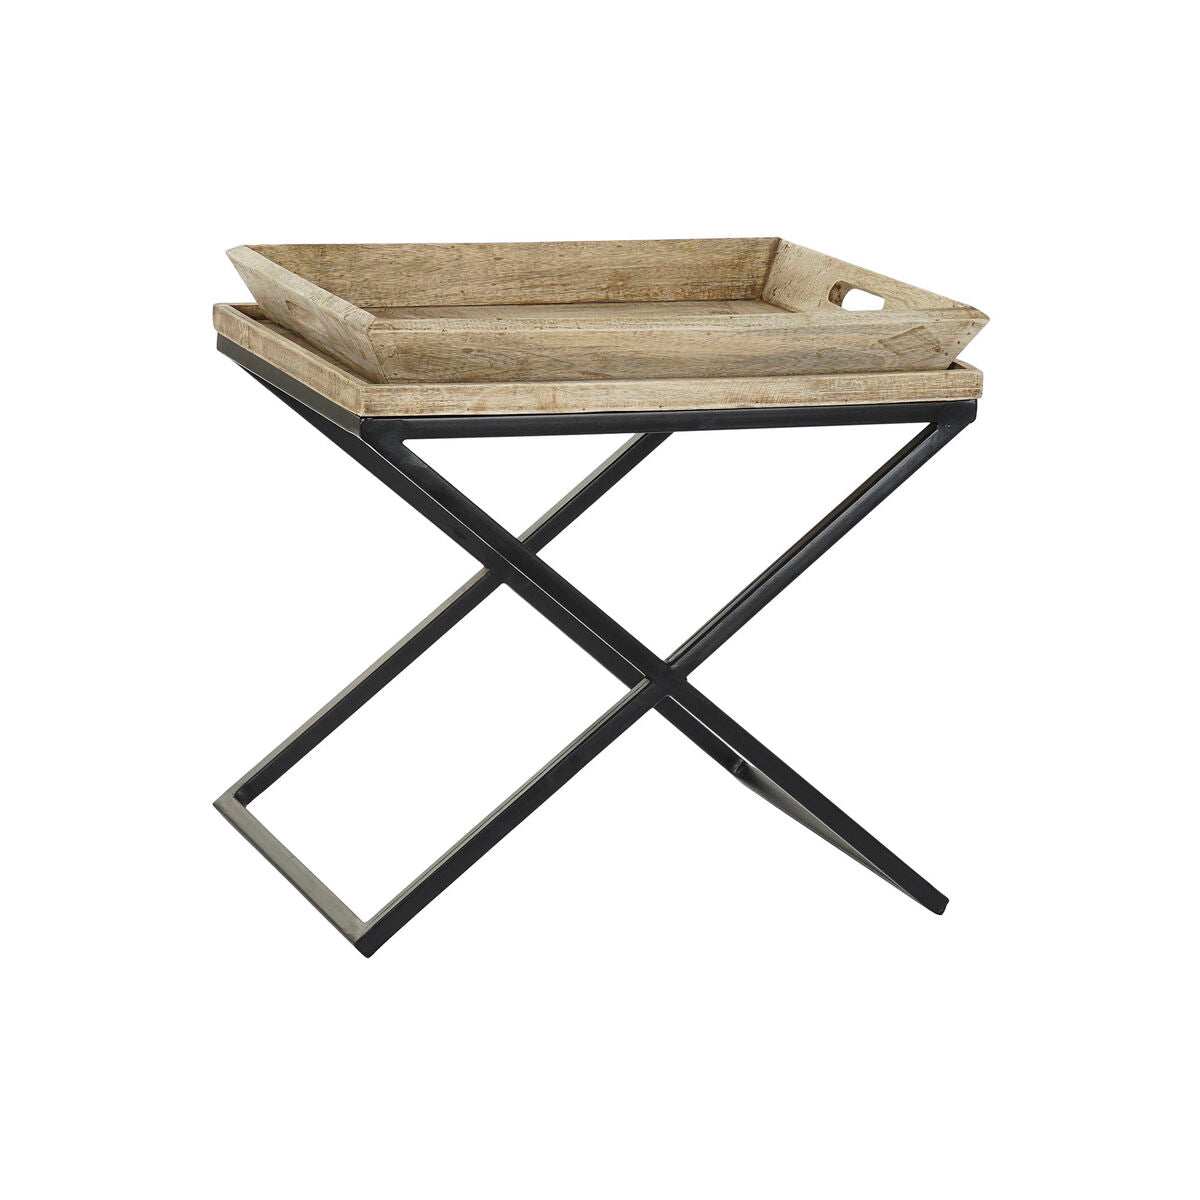 Side table in Mango wood and Black Metal (55 x 45 x 53 cm)